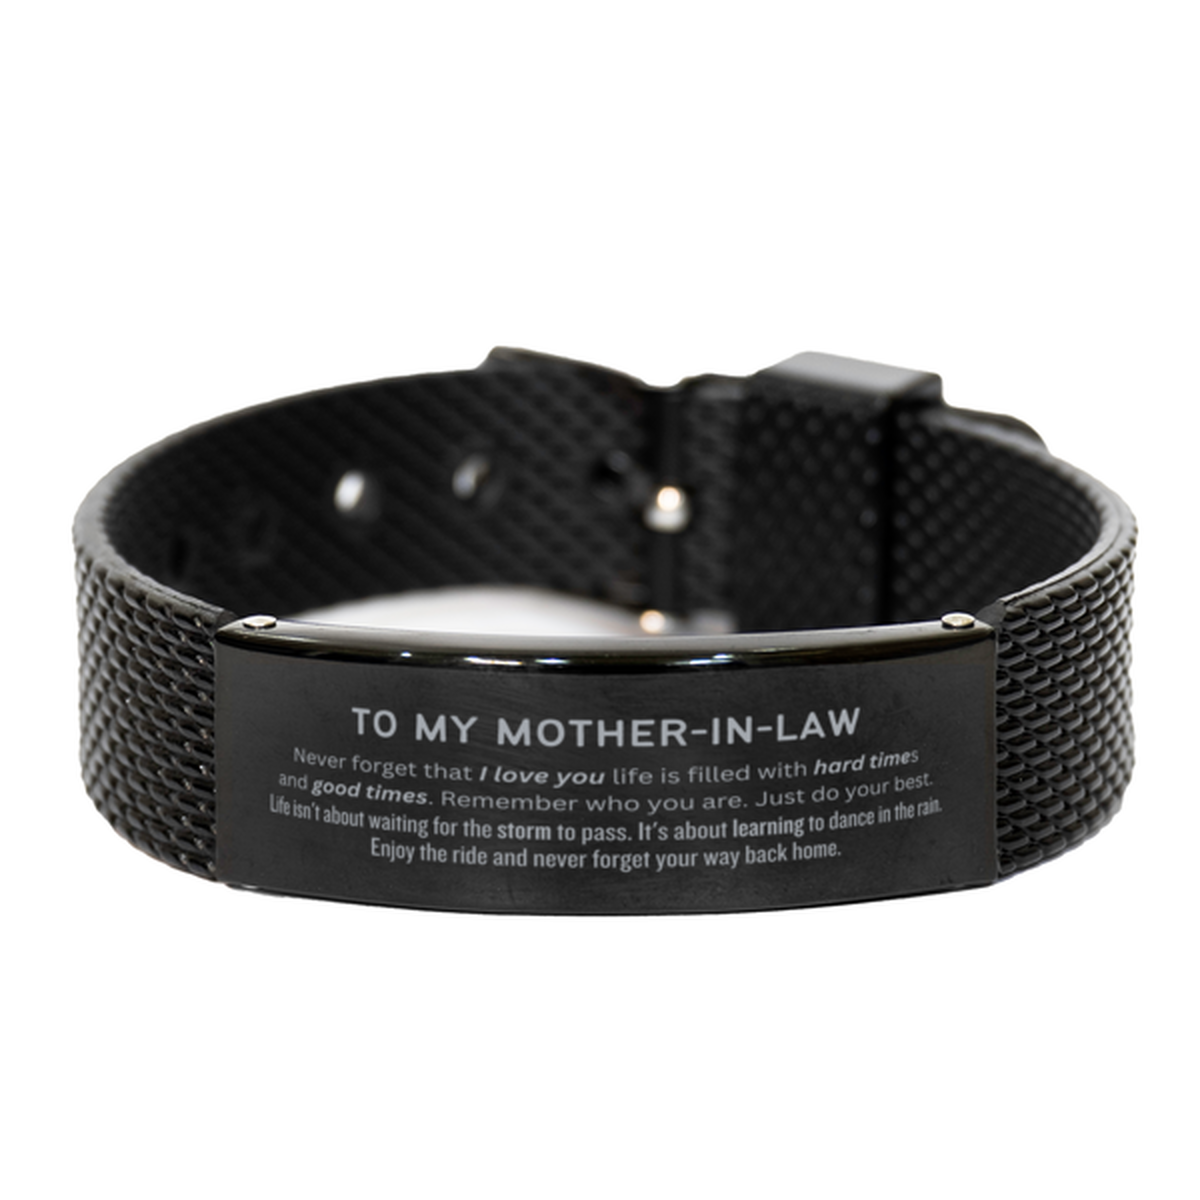 Christmas Mother-In-Law Black Shark Mesh Bracelet Gifts, To My Mother-In-Law Birthday Thank You Gifts For Mother-In-Law, Graduation Unique Gifts For Mother-In-Law To My Mother-In-Law Never forget that I love you life is filled with hard times and good tim